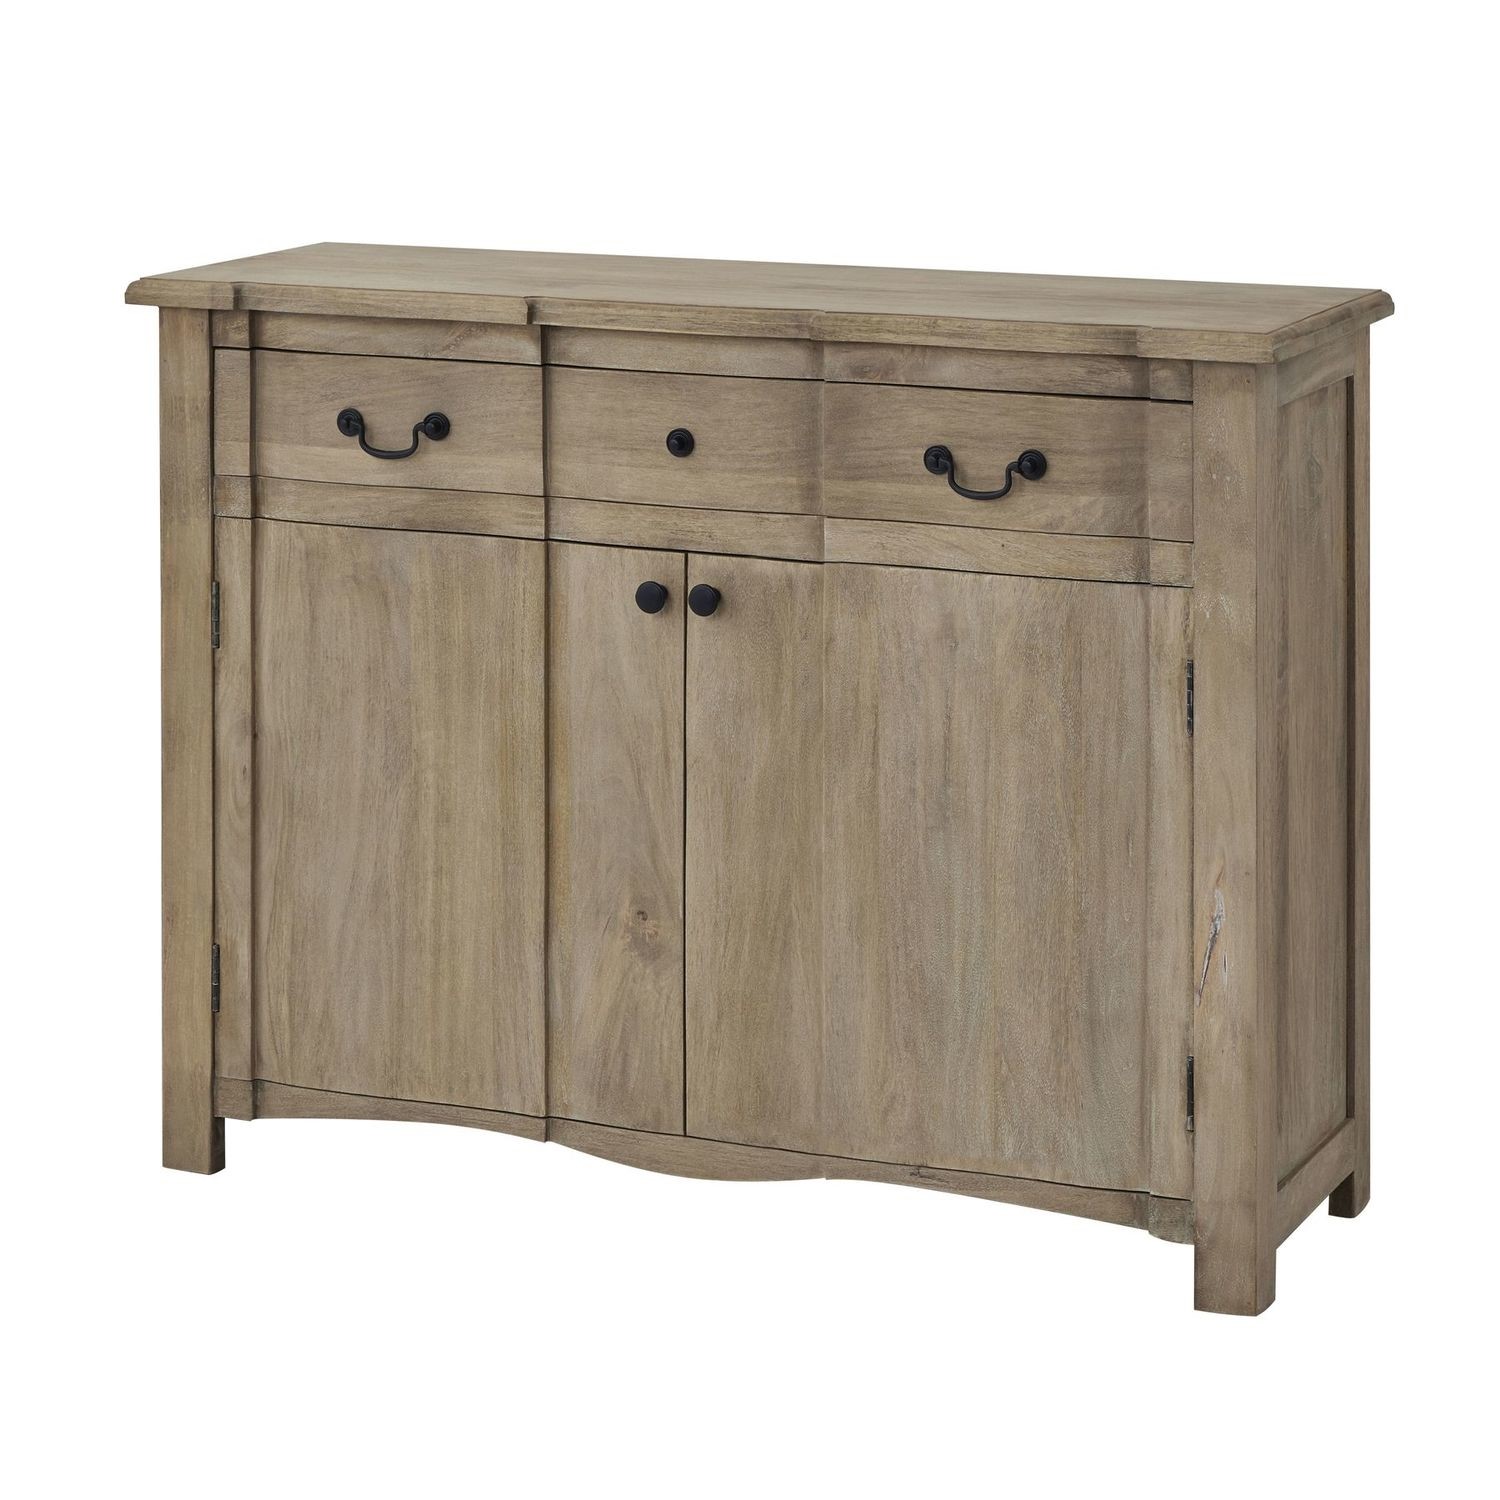 Read more about Copgrove collection 1 drawer 2 door sideboard